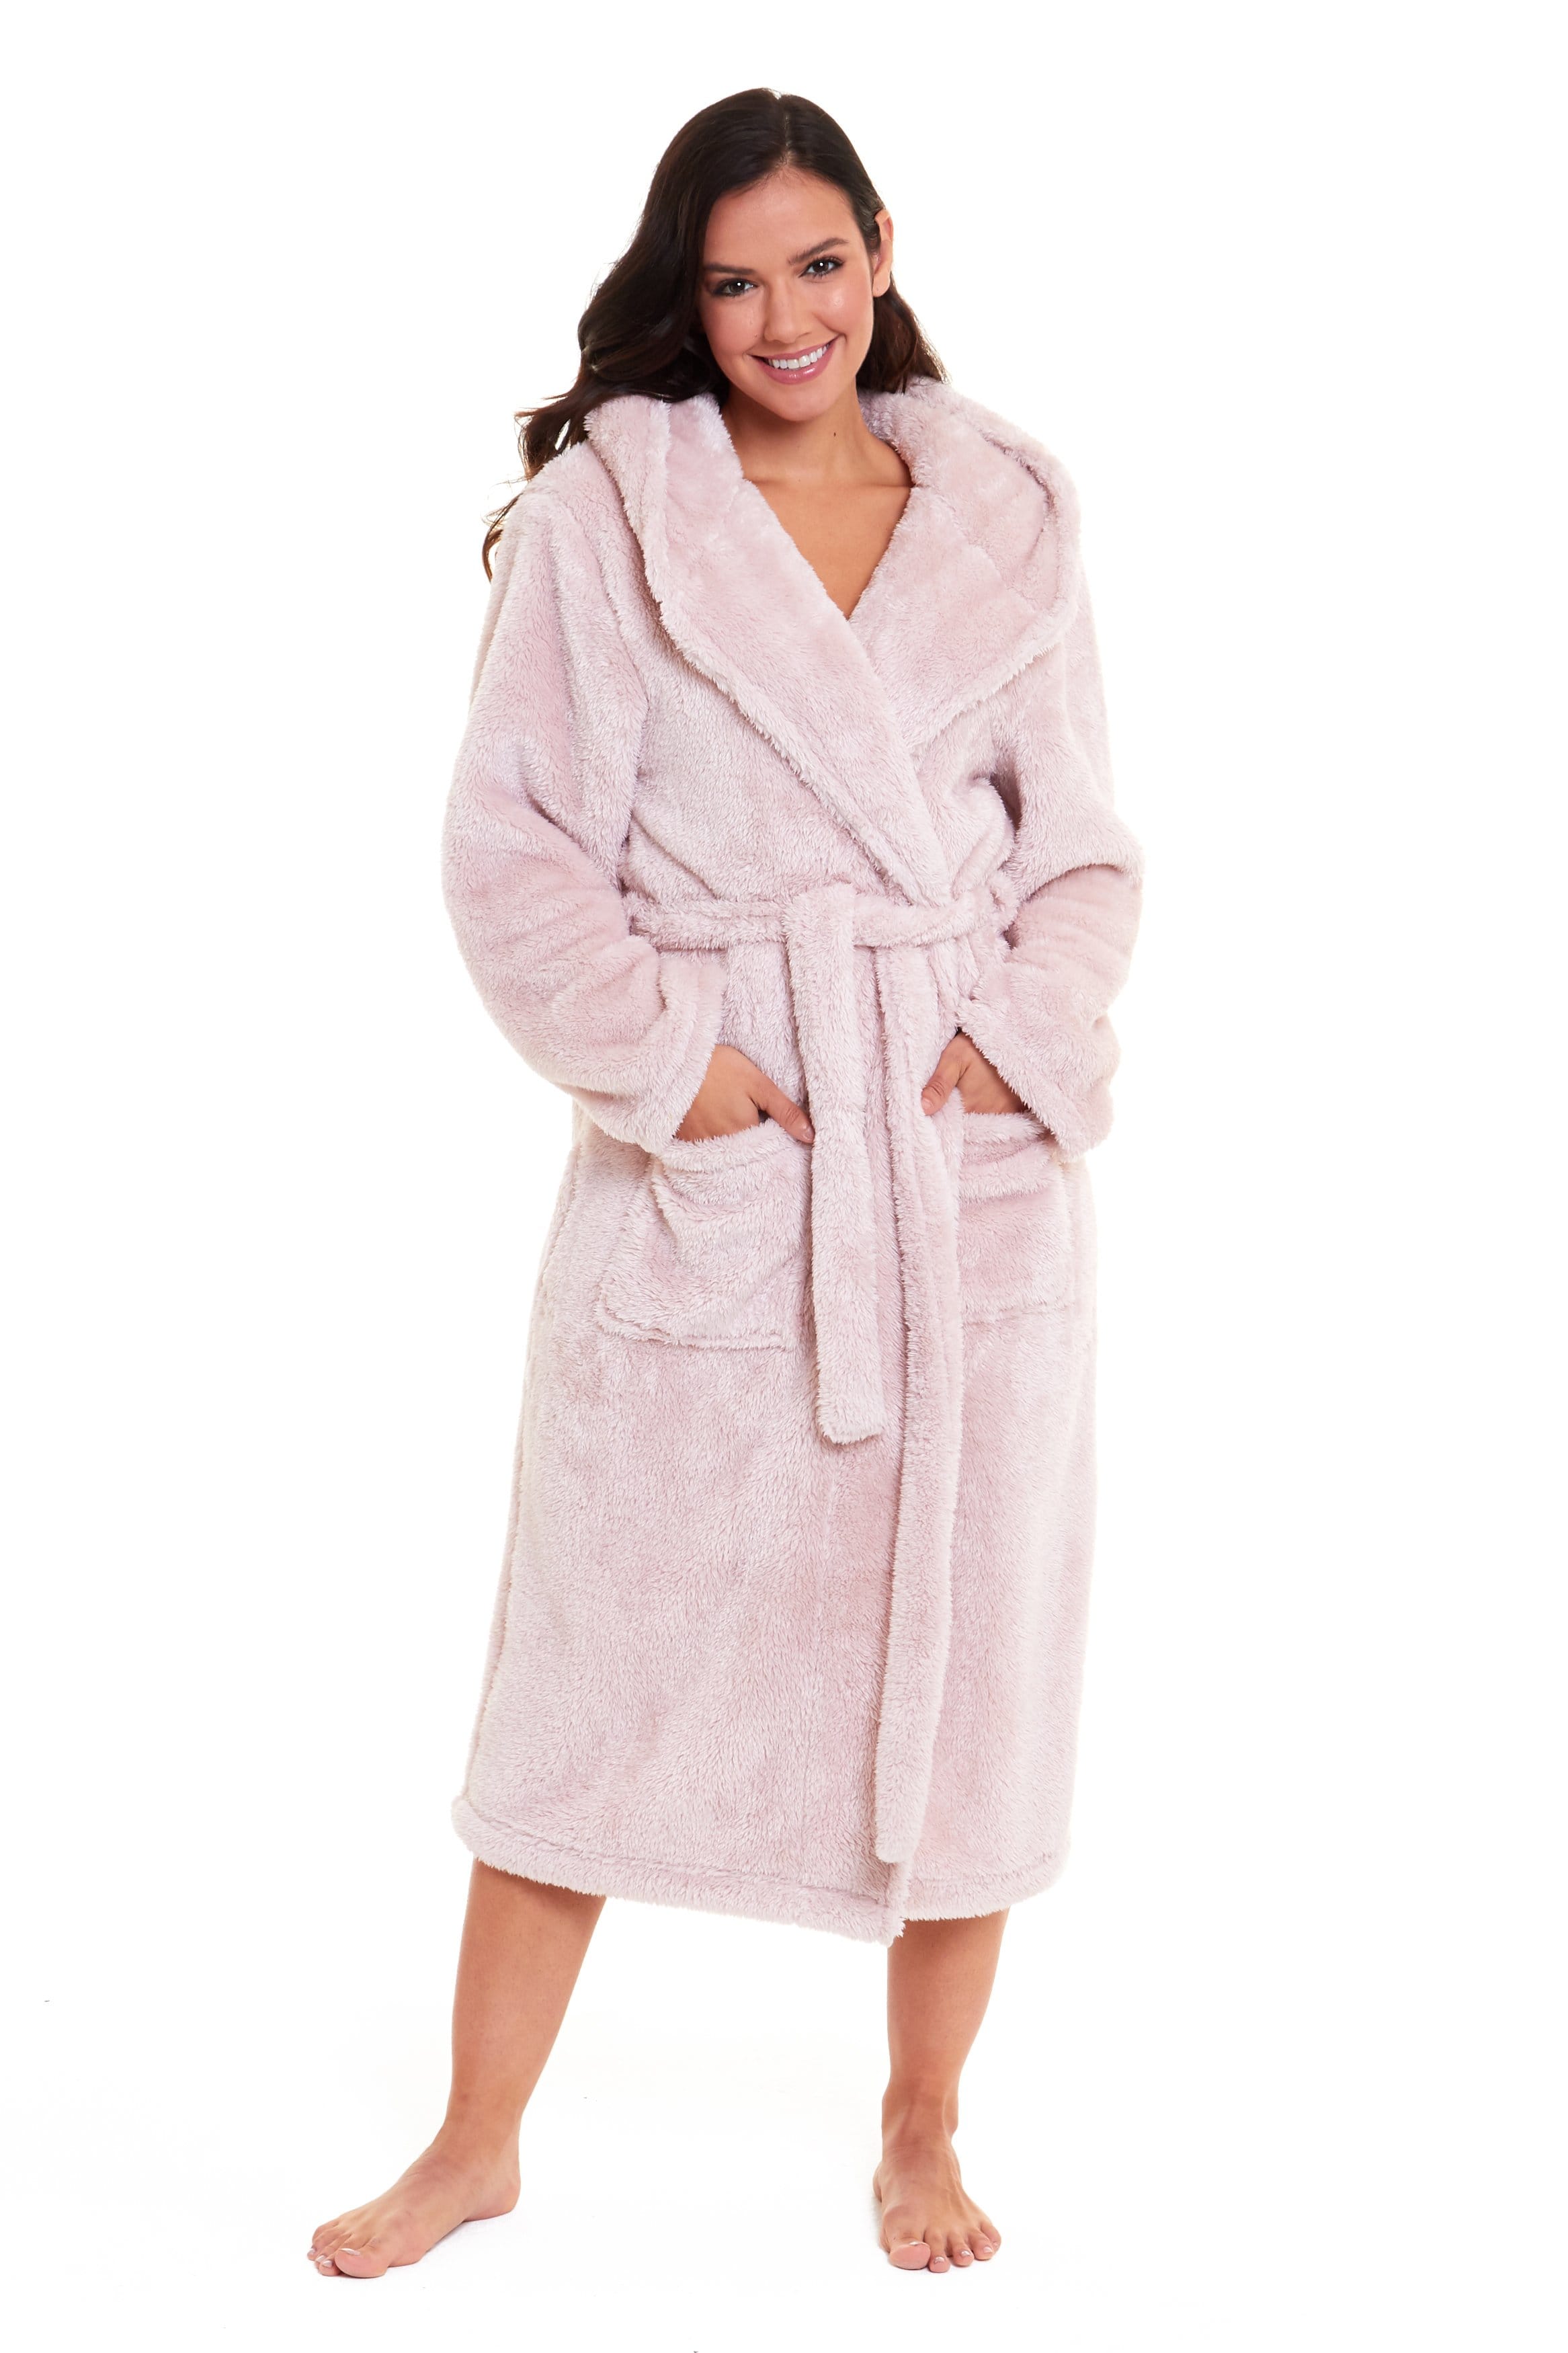 Best Zip-Front Robe Dressing Gown Gift Idea 2017 | The Strategist